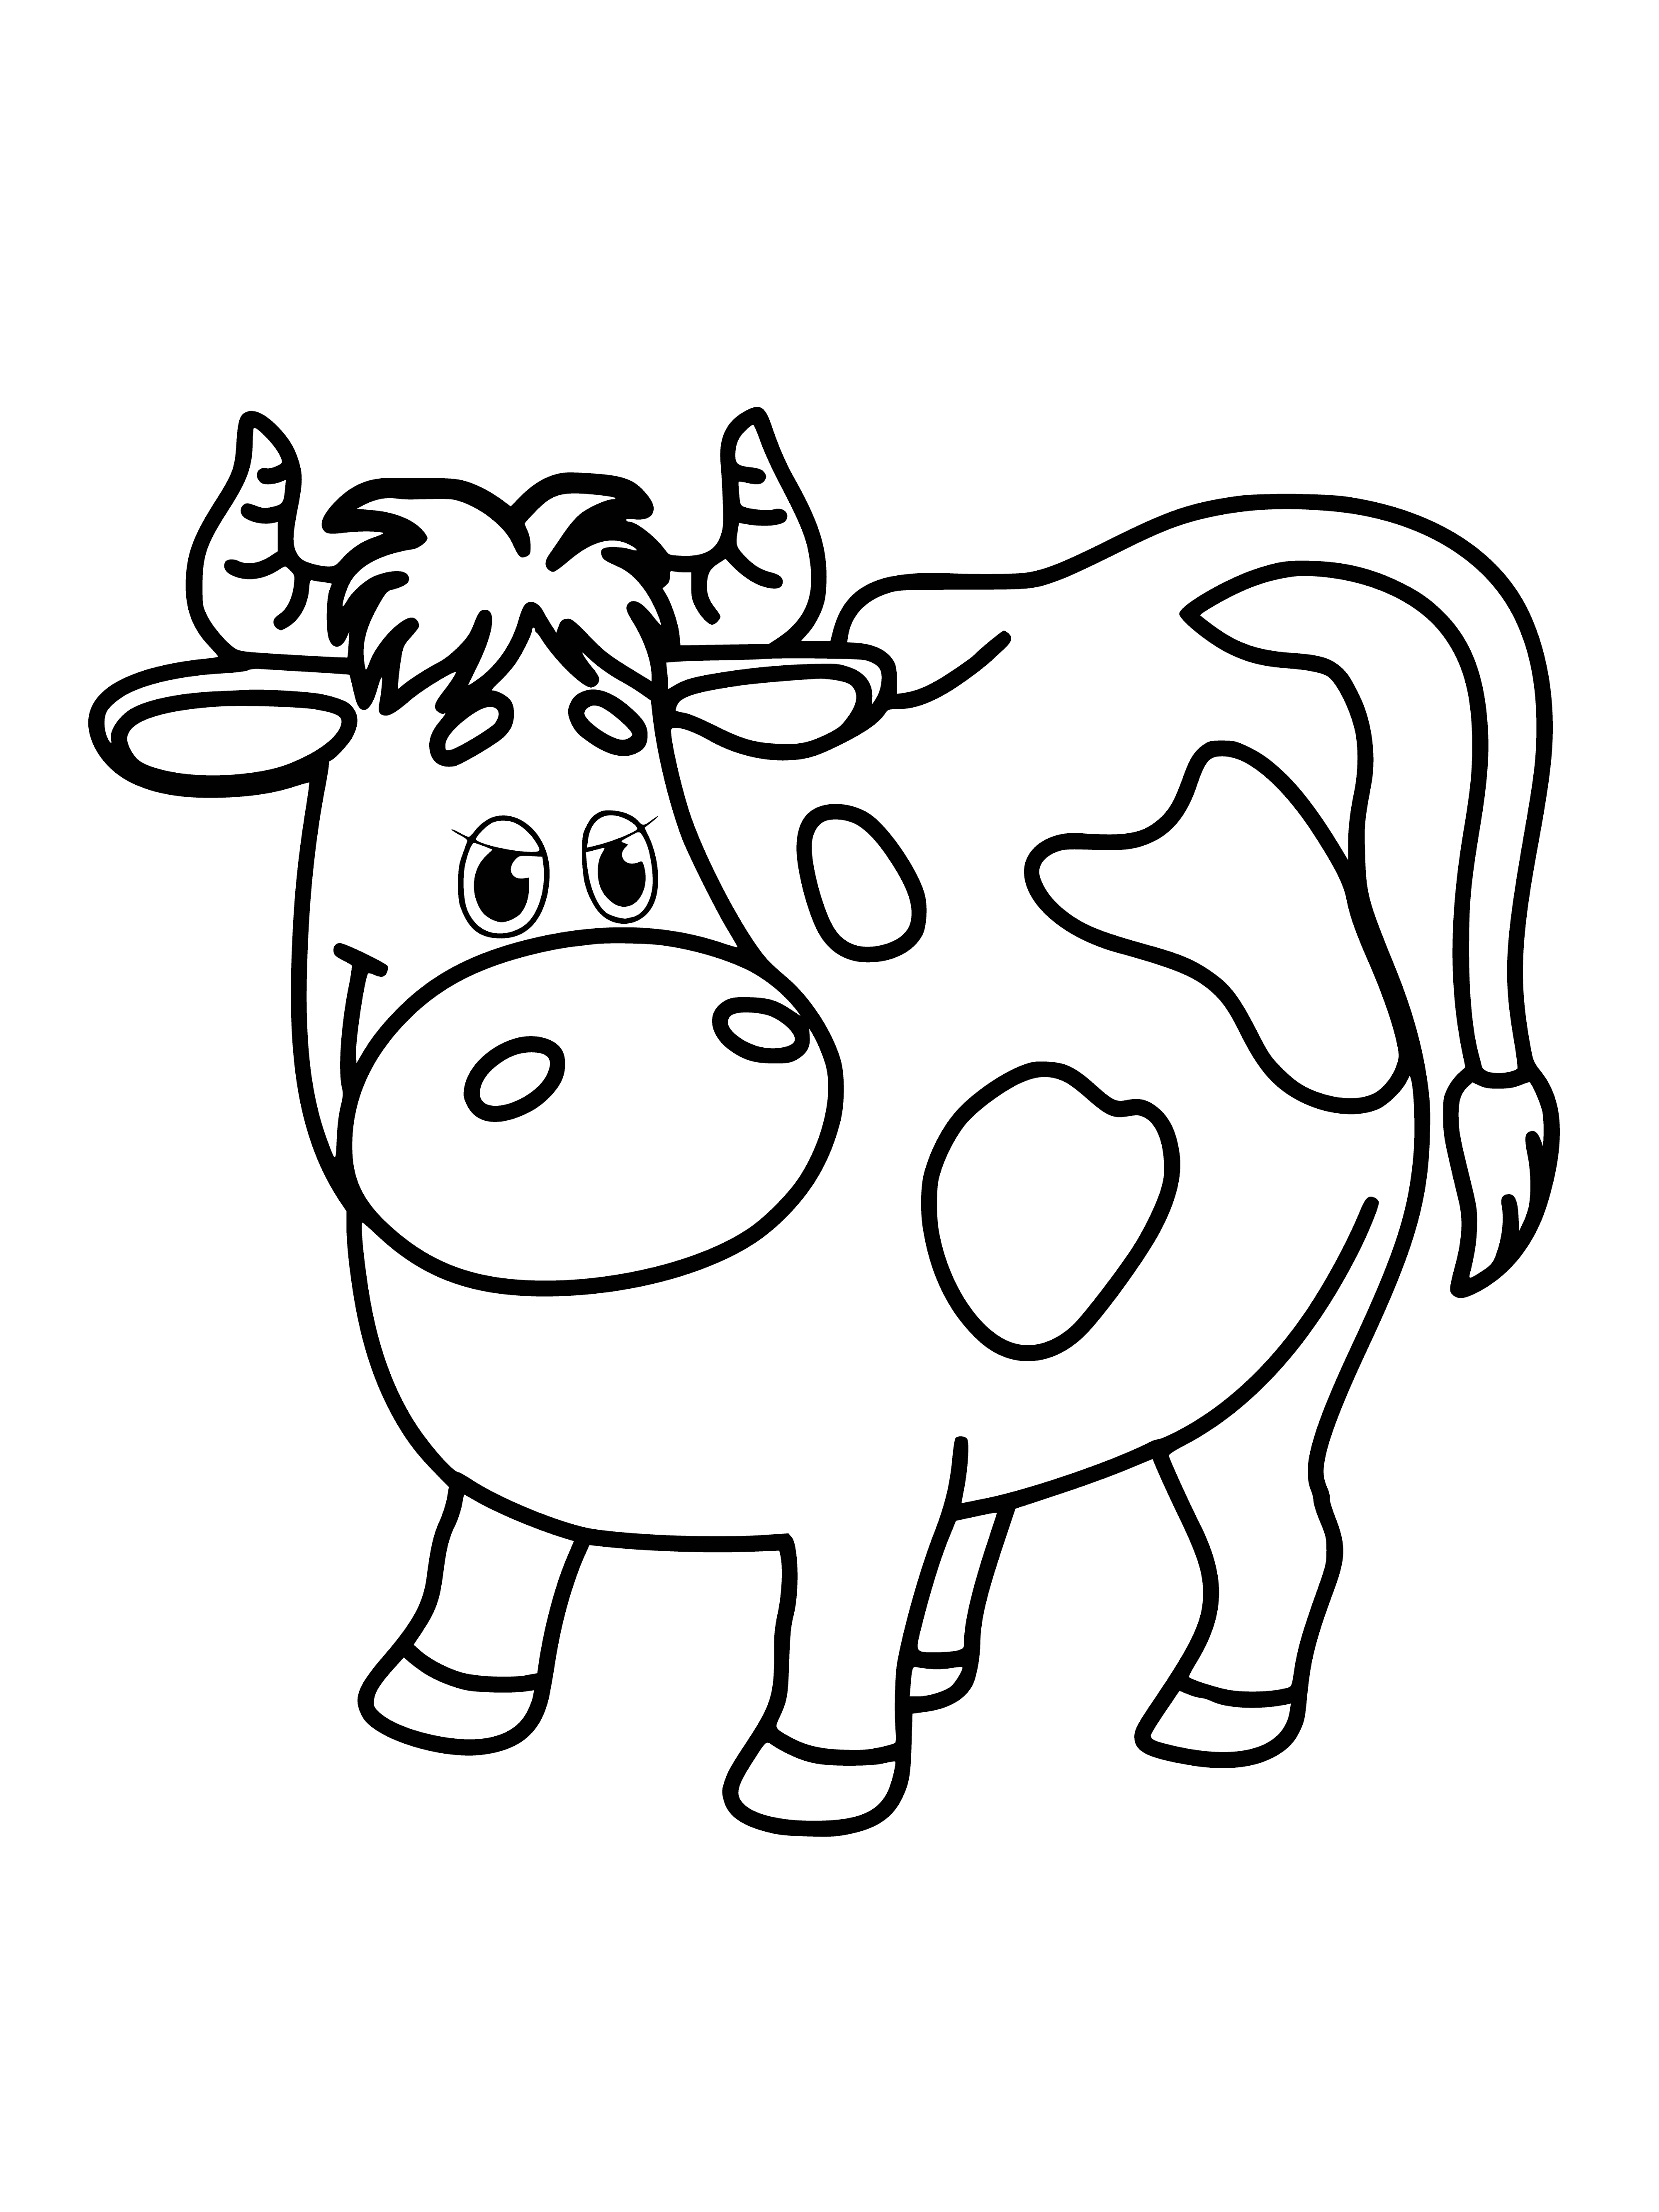 coloring page: Large, dark-colored bull stands proudly on grass, neck muscular, horns curved, eyes closed, head tilted back; with a blue sky behind.